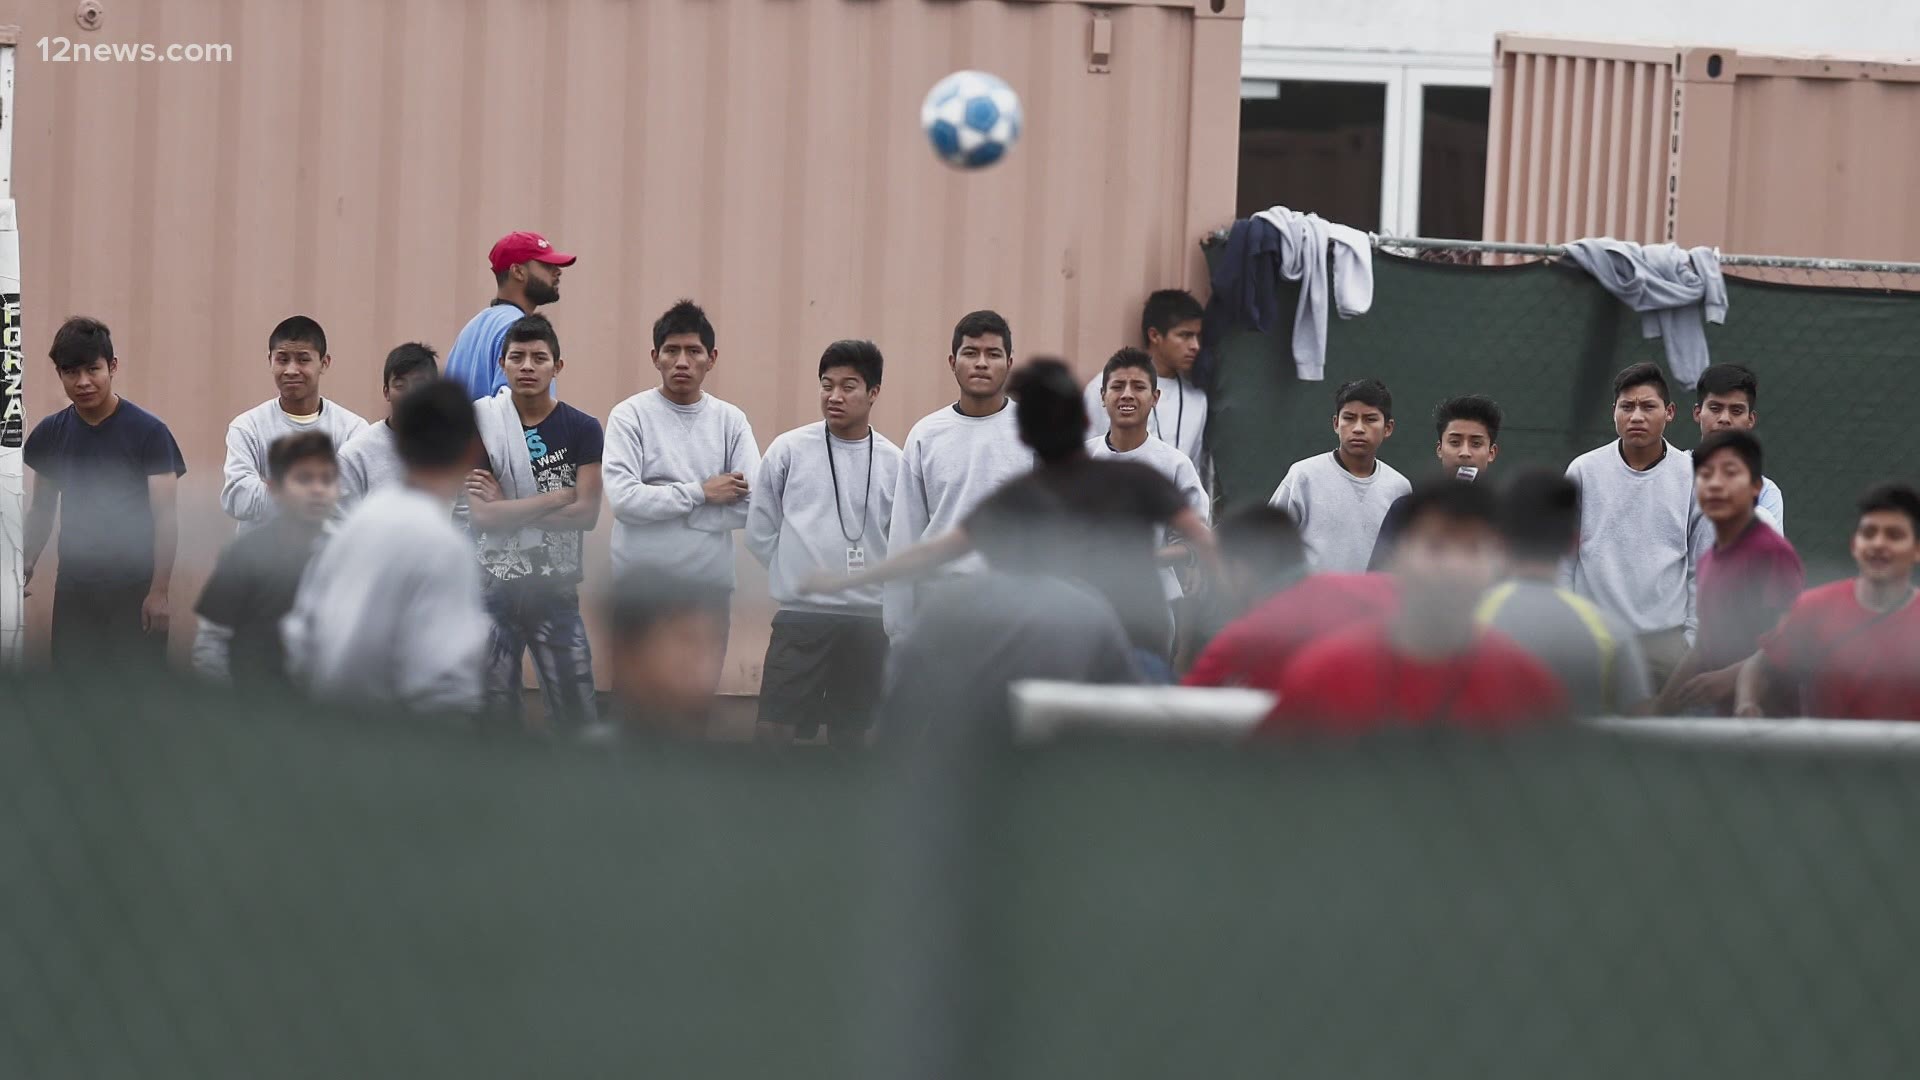 New shelters for unaccompanied minors and families could soon come to Arizona. As the number of apprehensions at the border continue to rise details will be released